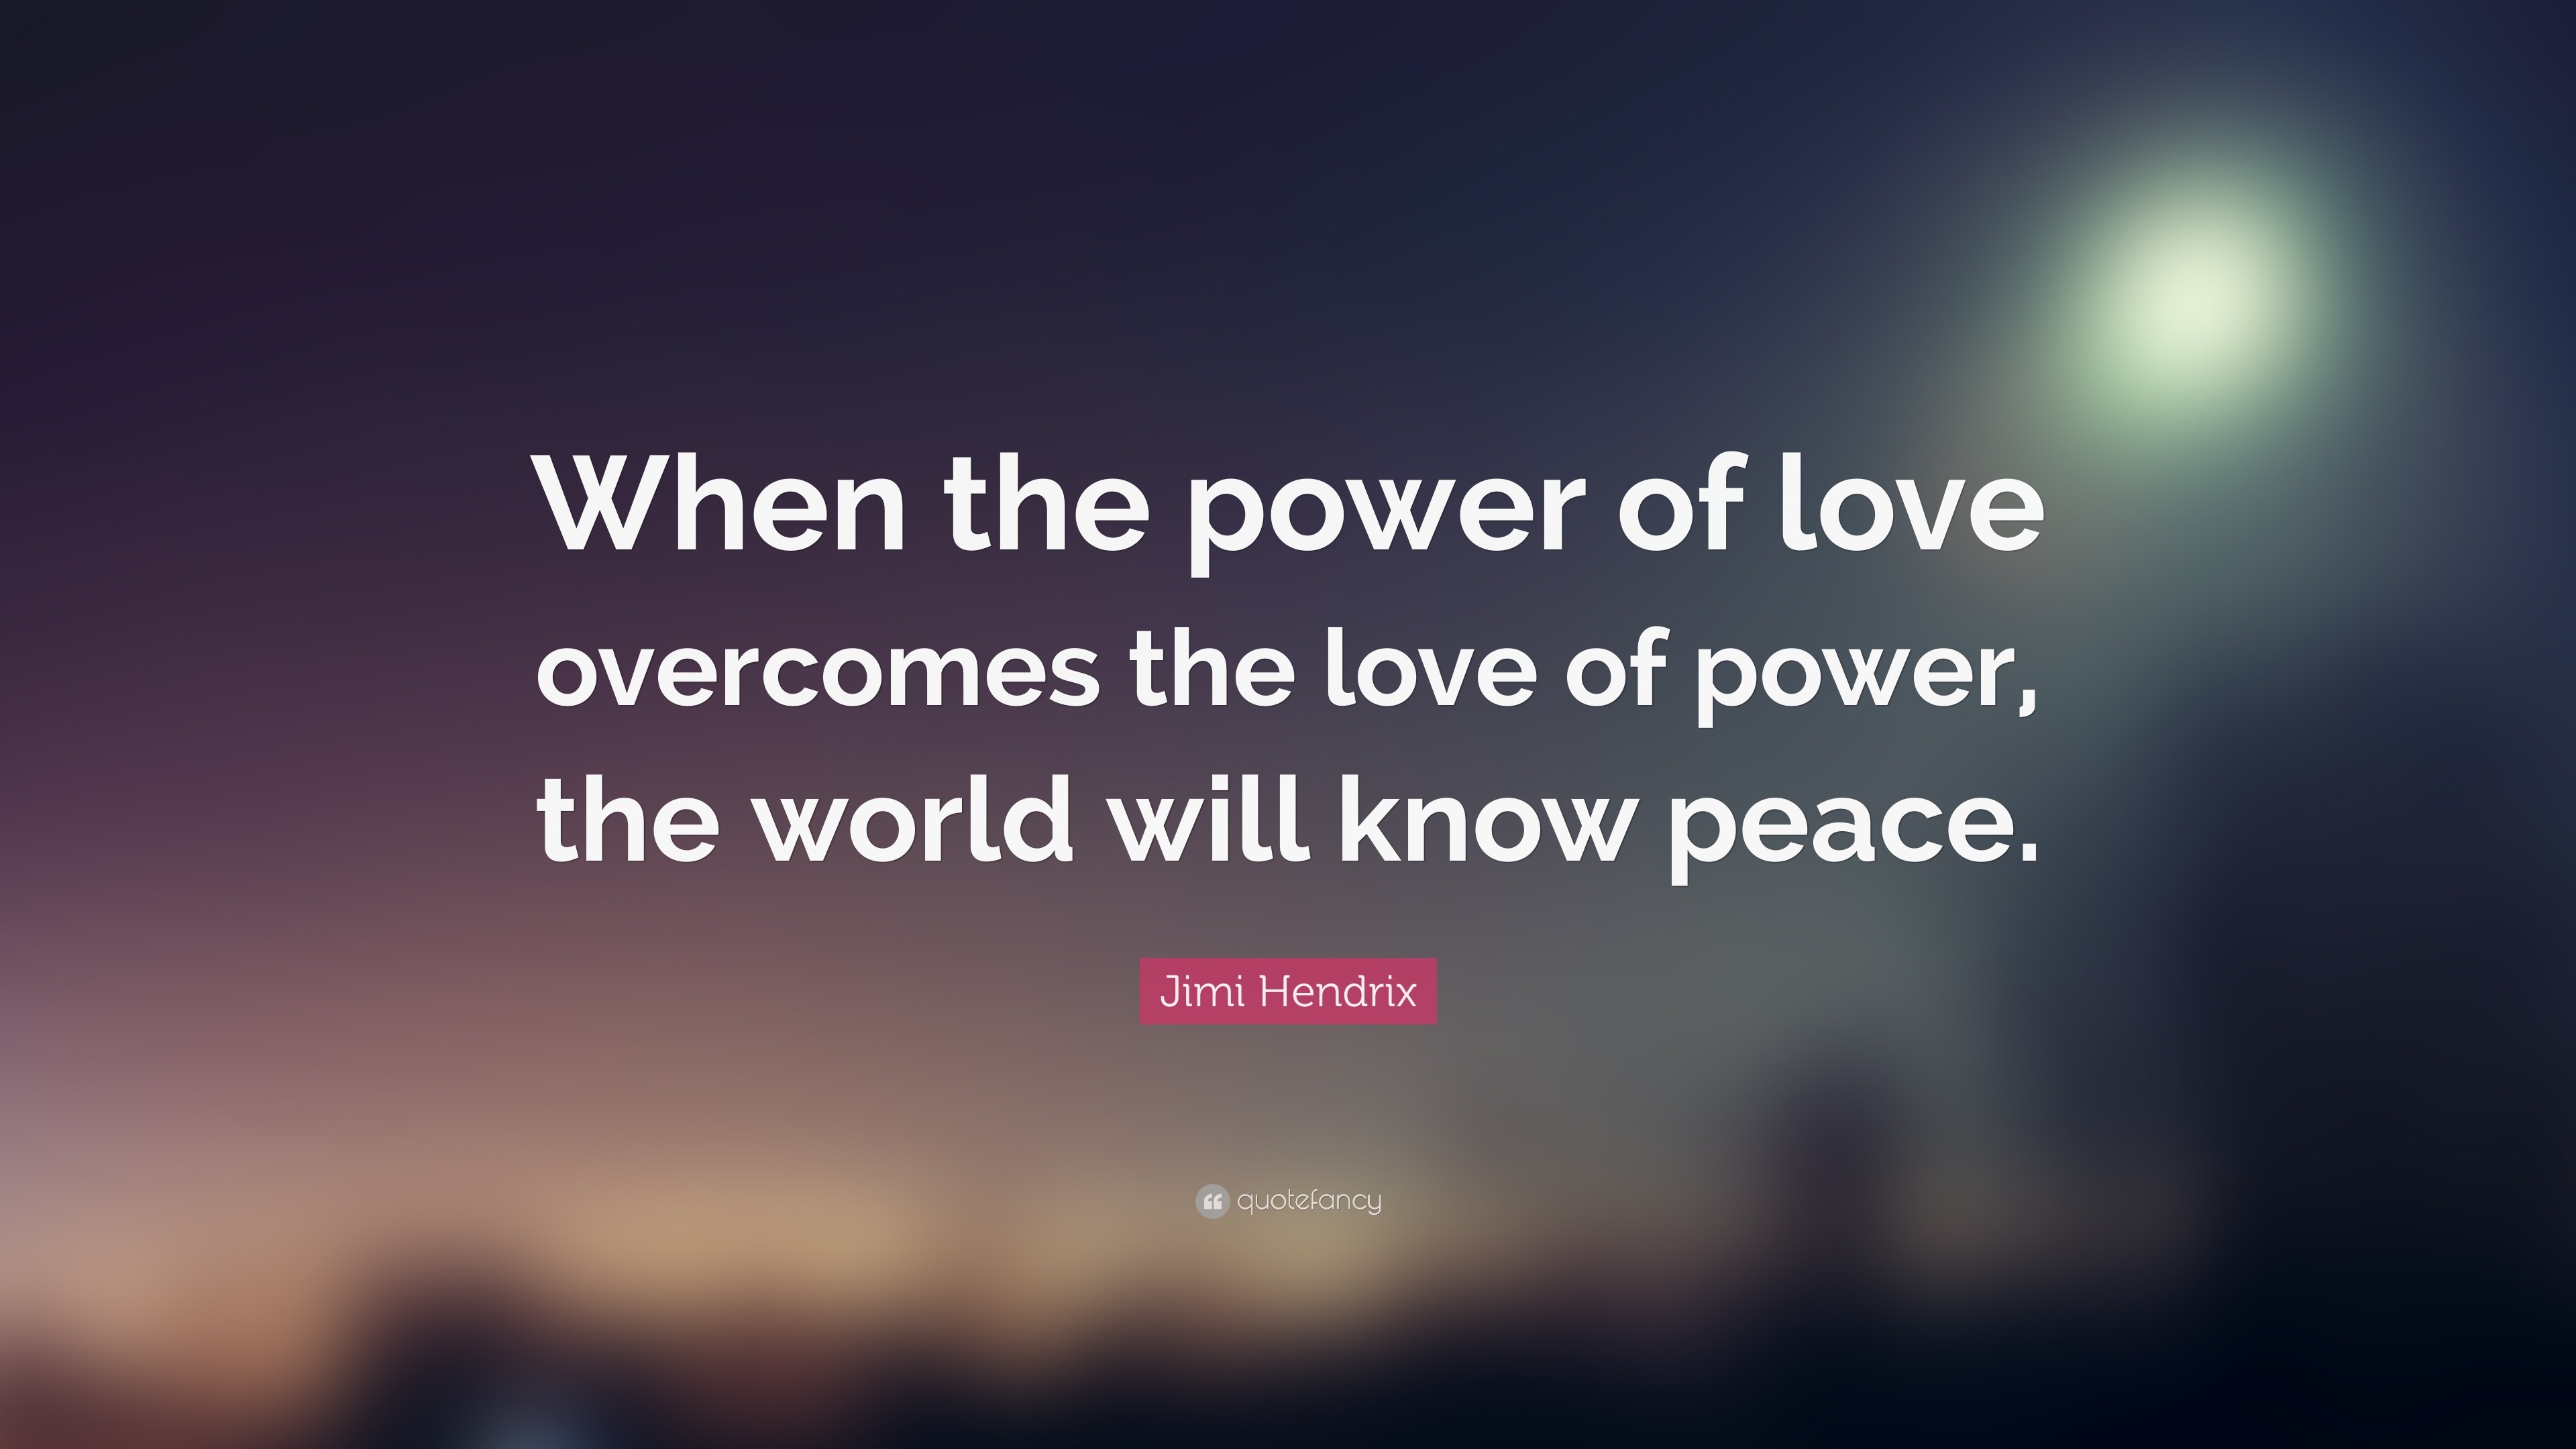 Jimi Hendrix Quote: “When the power of love overcomes the love of power ...